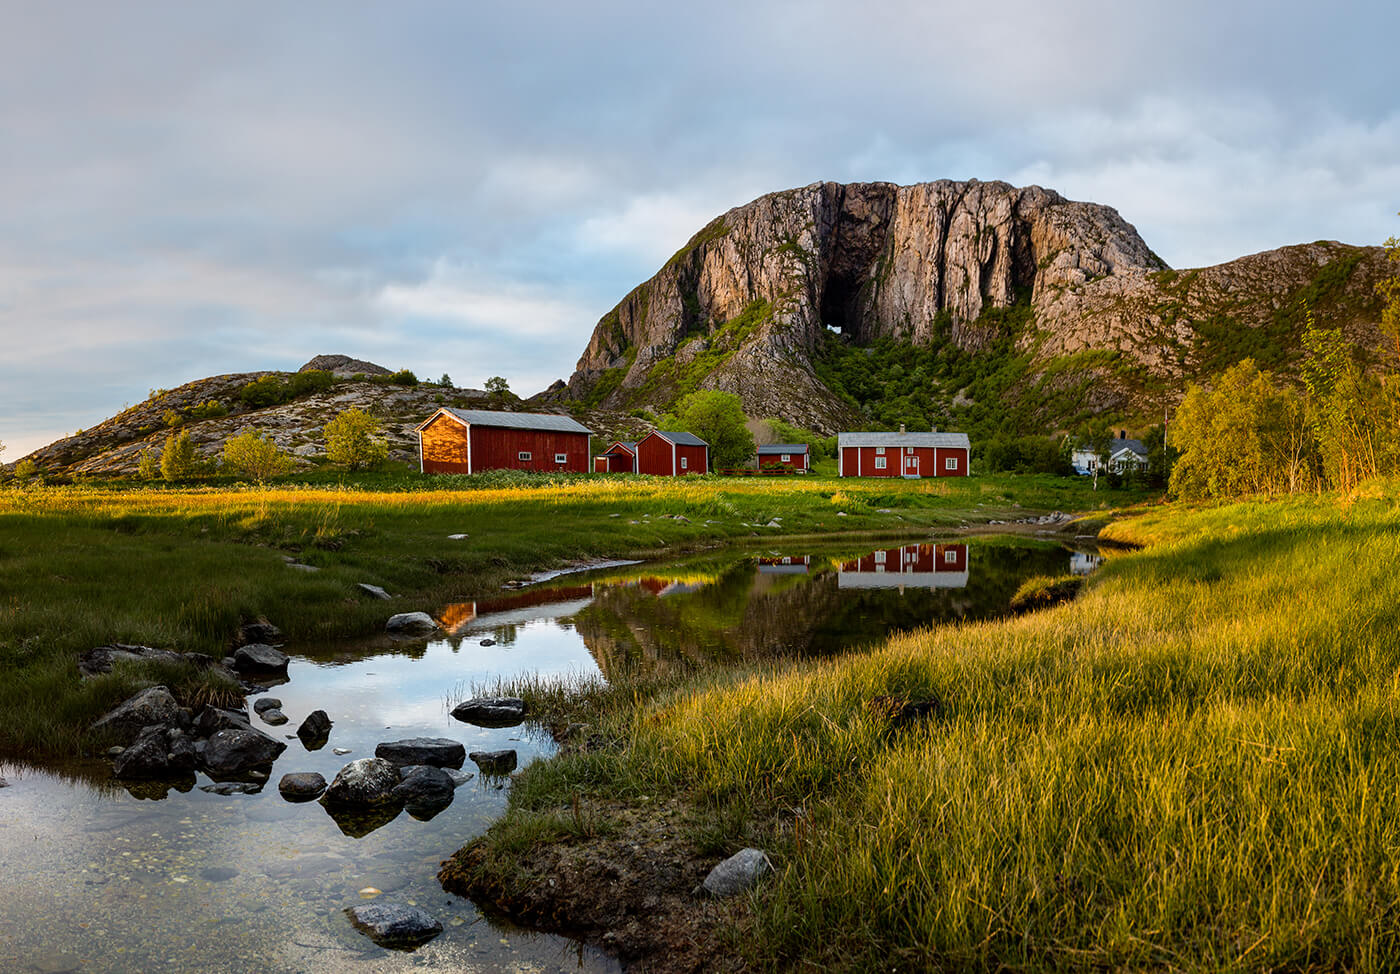 Torghatten – The mountain with a hole straight through